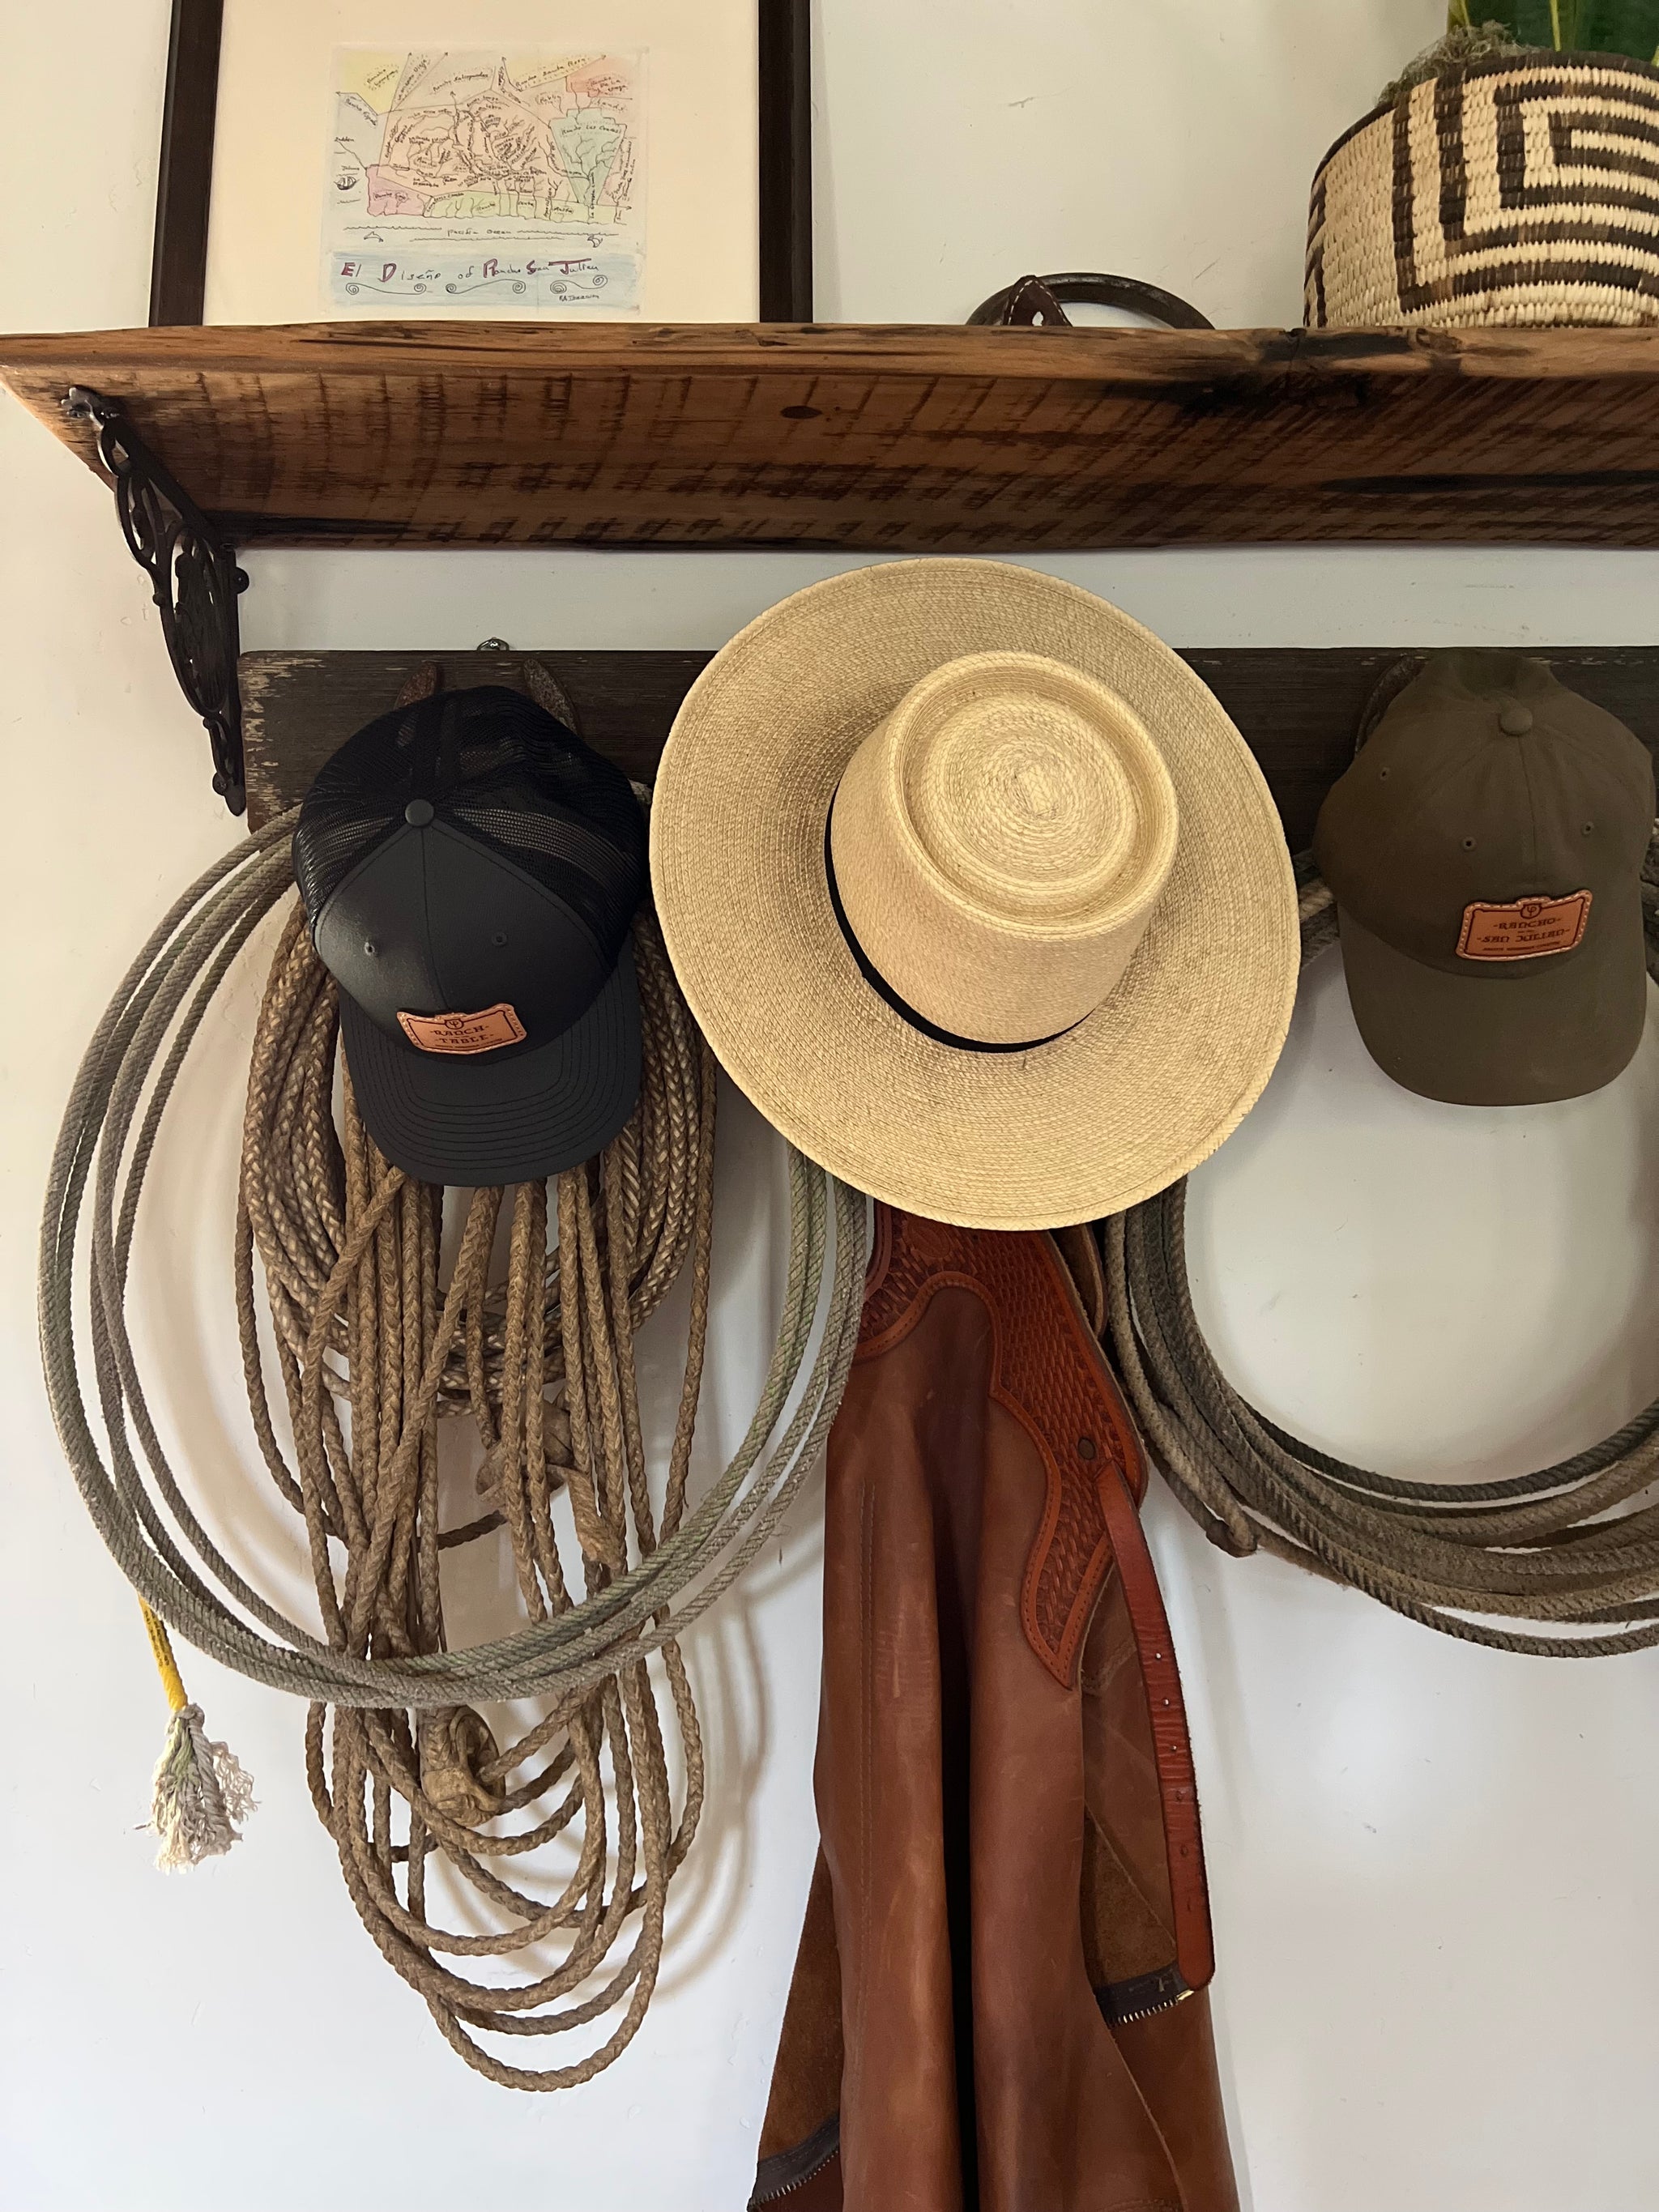 Hat Stand Display Examples for Caps & Headwear